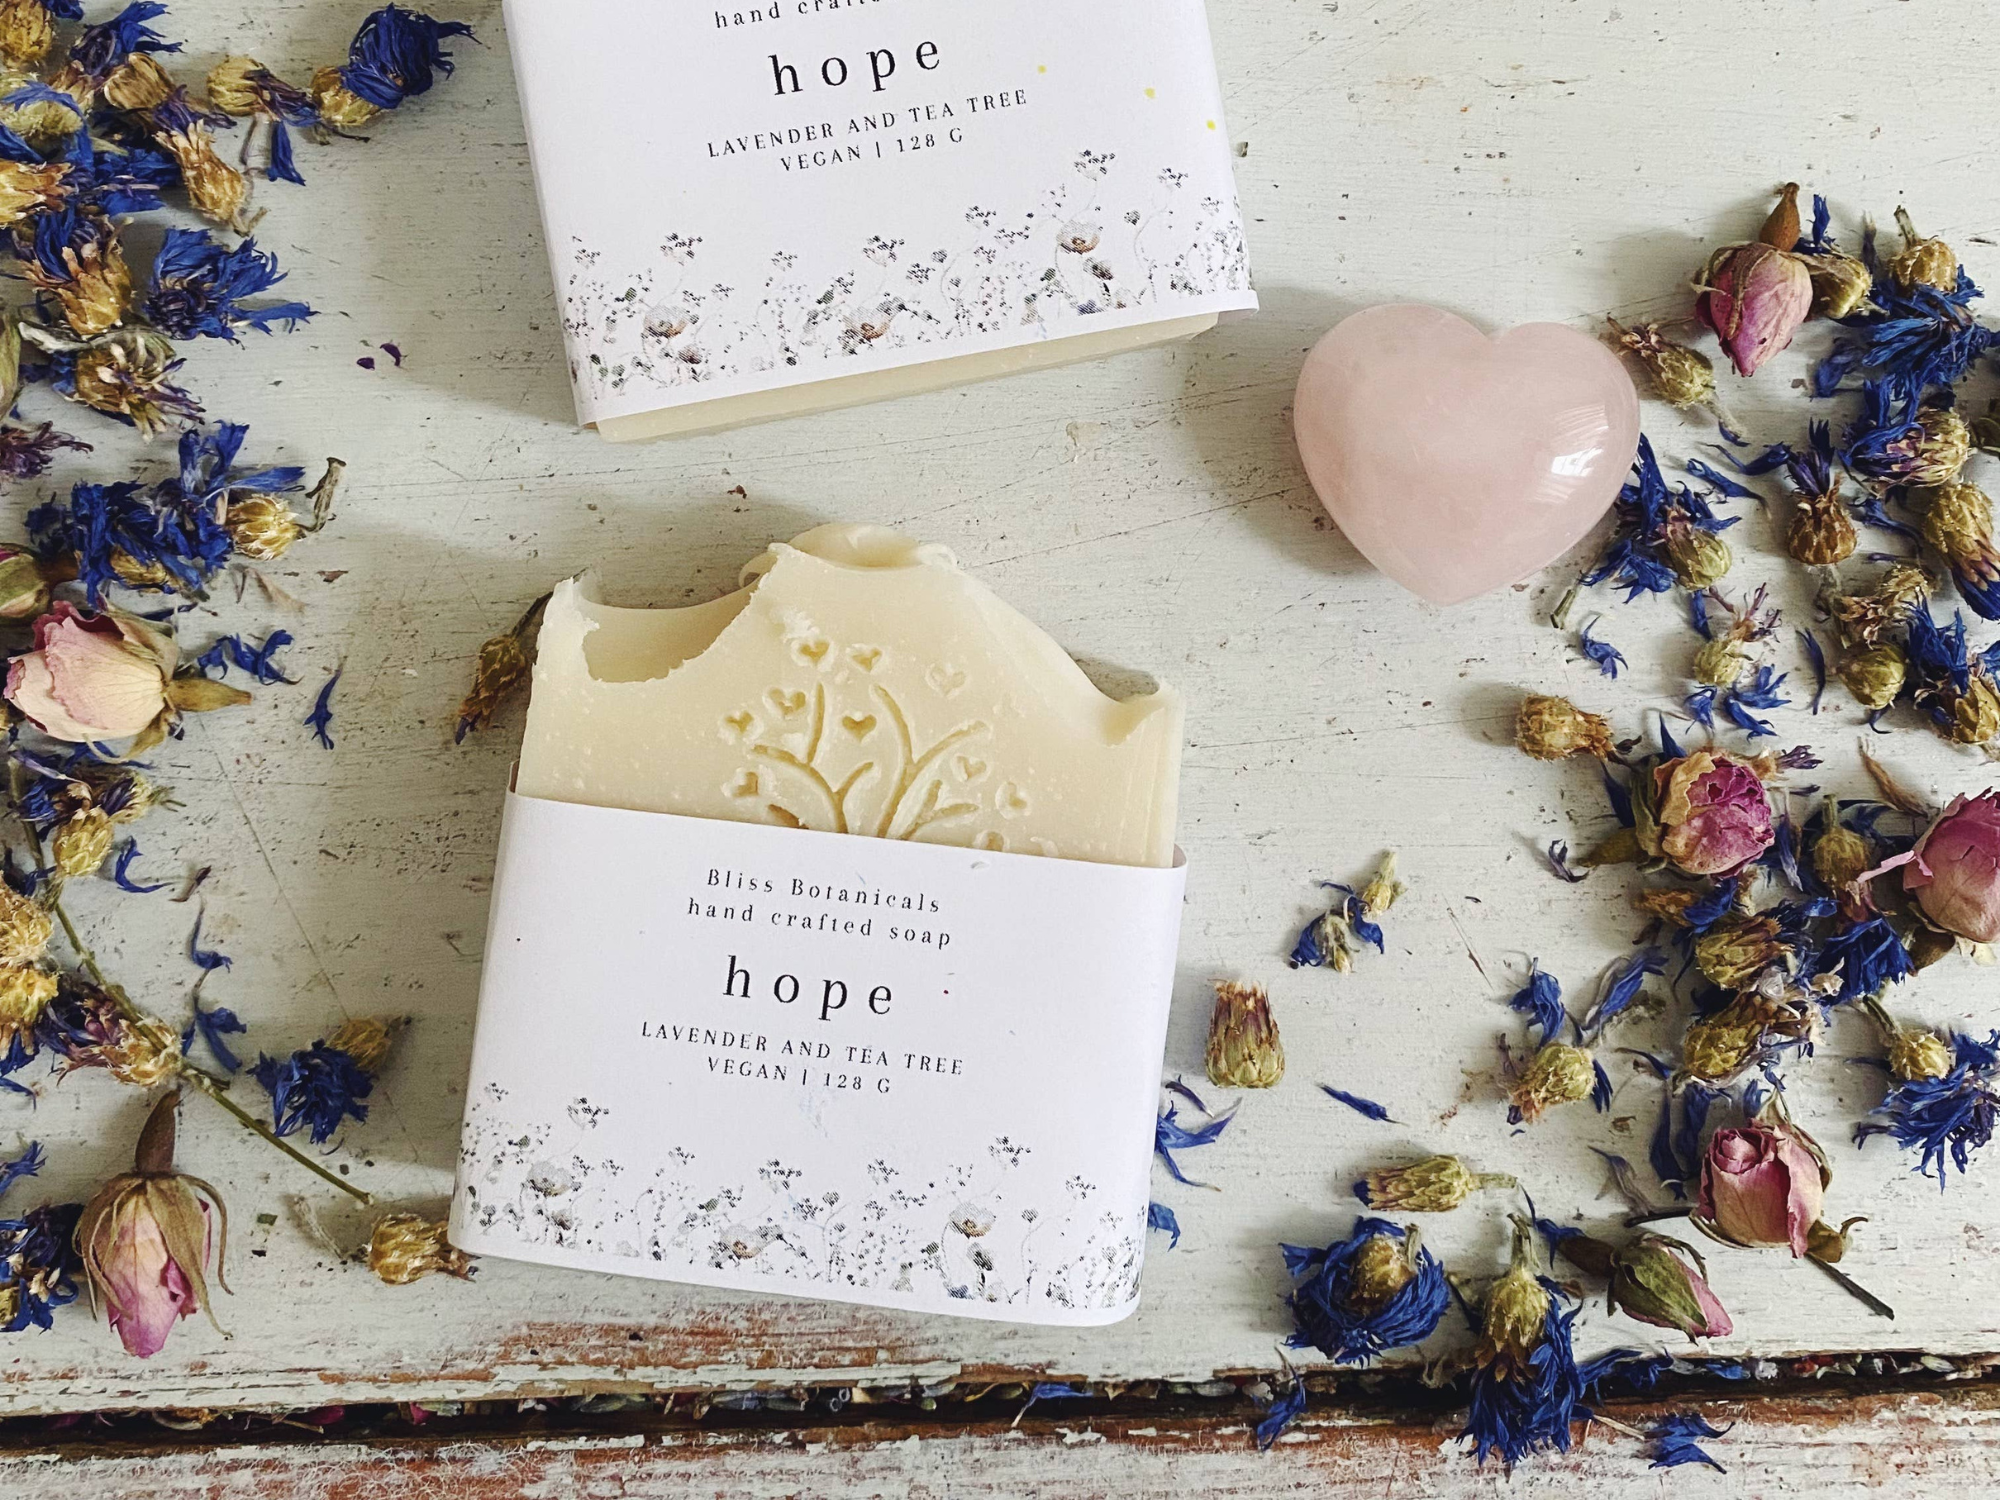 Handcrafted soap labeled "hope" with lavender and tea tree, surrounded by dried flowers and a pink heart-shaped stone on a distressed wooden surface.